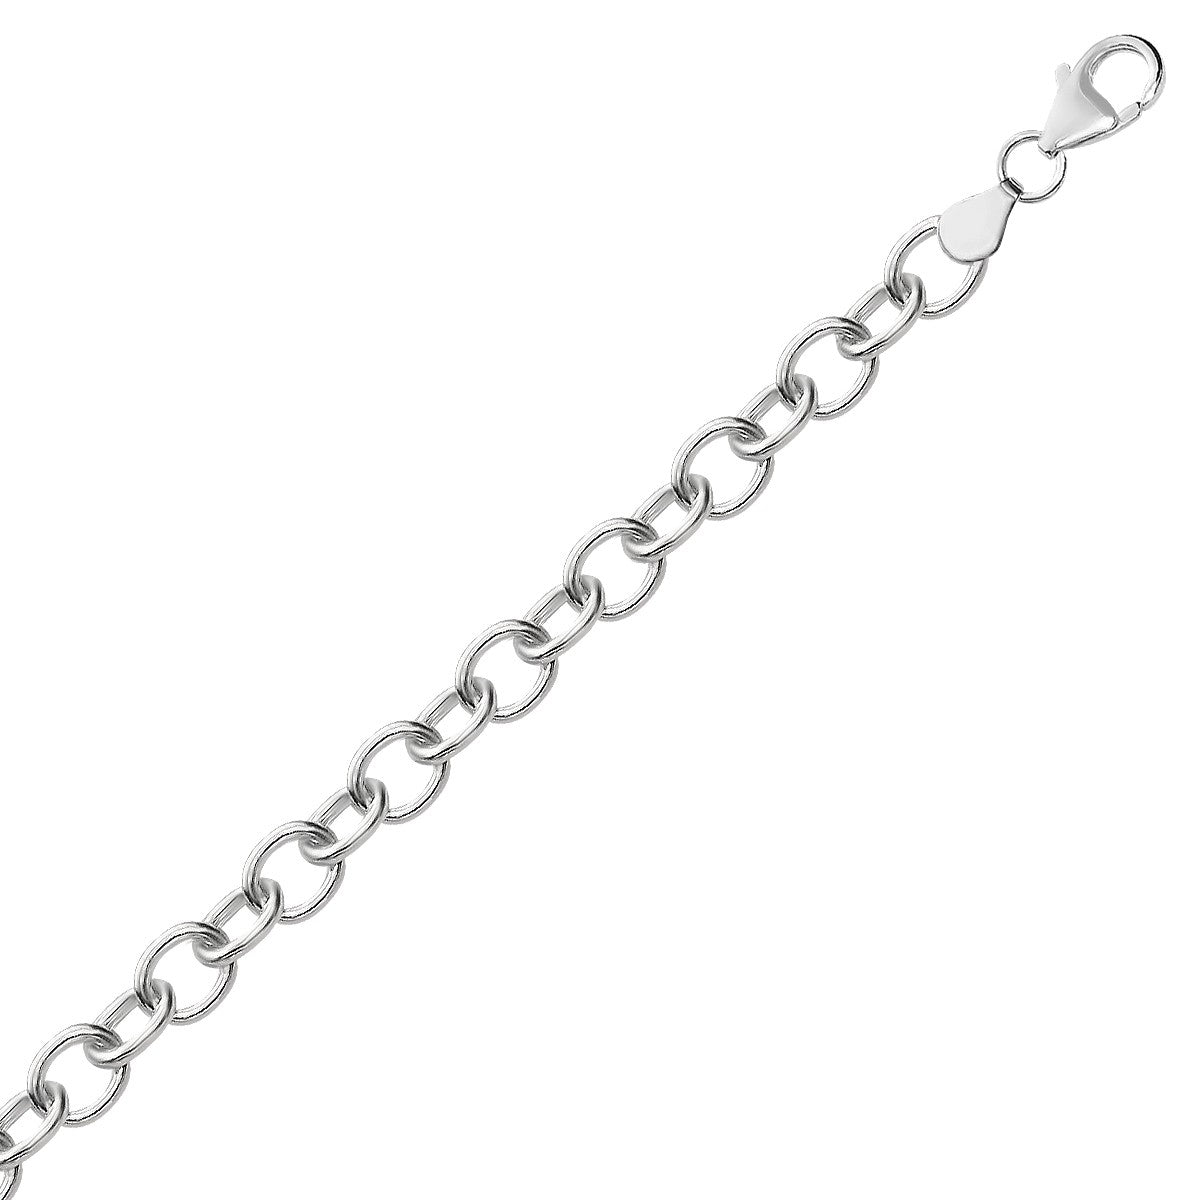 Sterling Silver Charm Polished Rhodium Plated Cable Bracelet (7.25 by 0.25 inches)